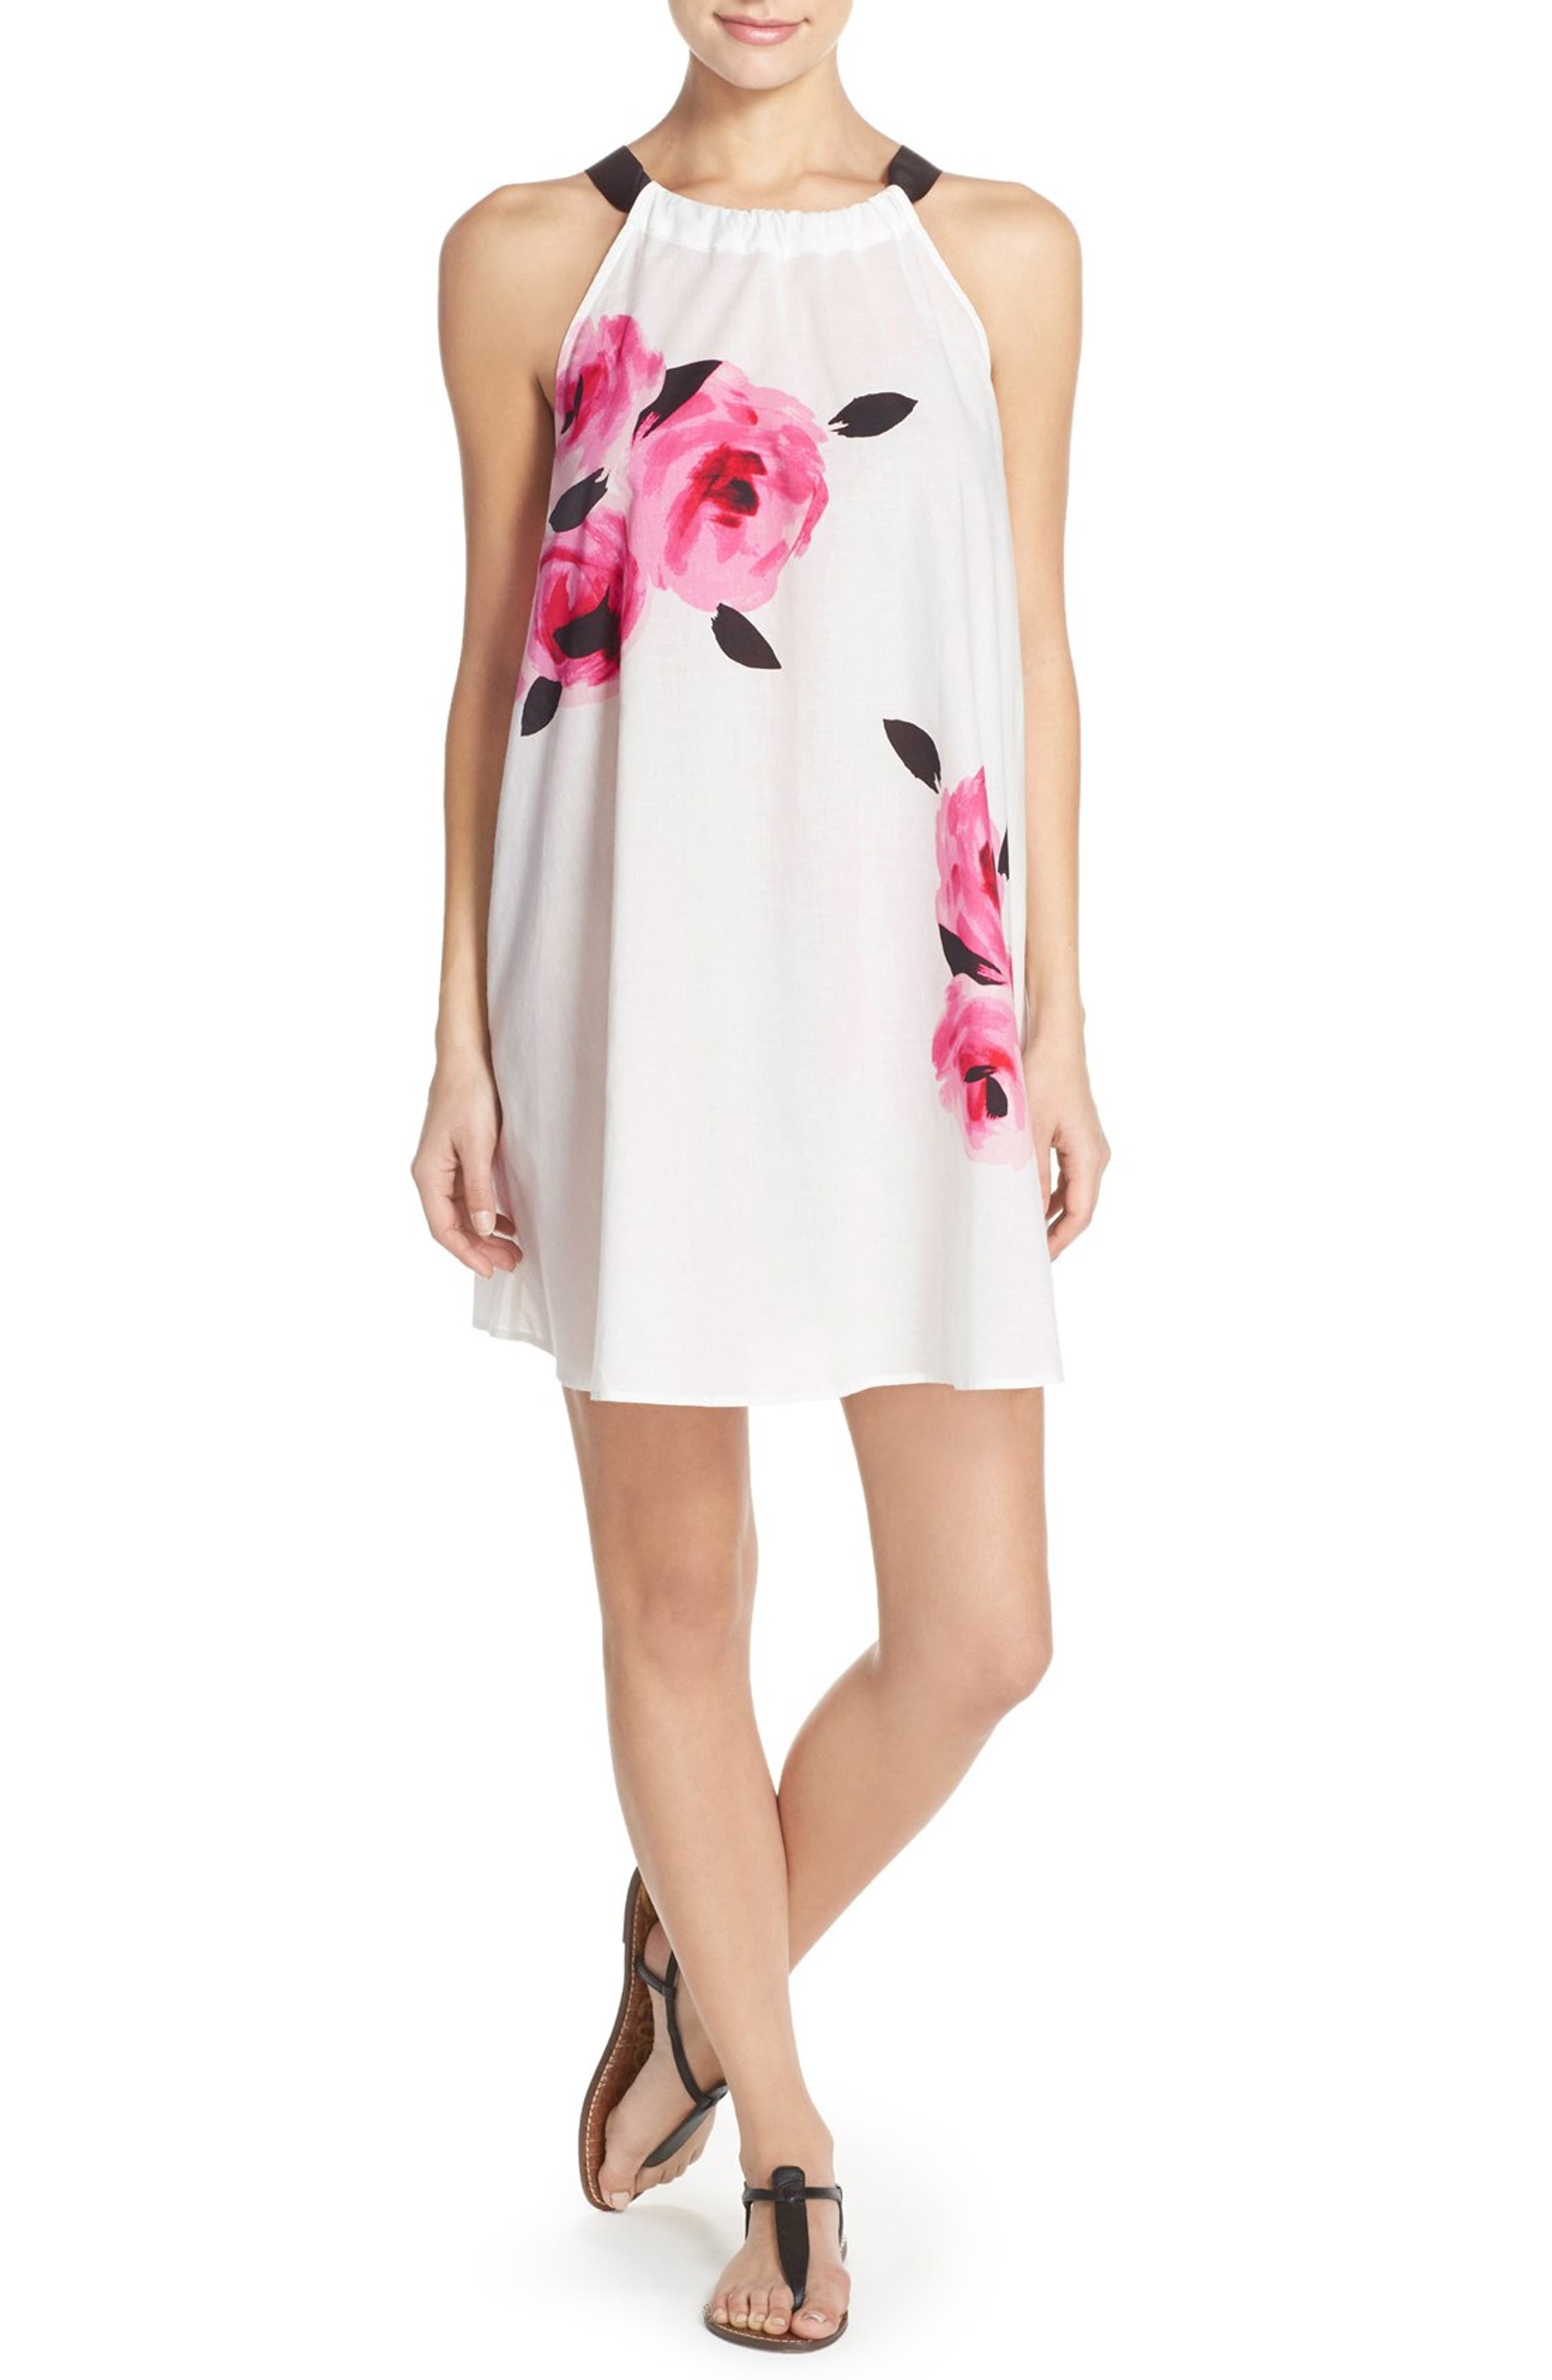 kate spade new york 'paloma beach' floral print cover-up dress | Nordstrom